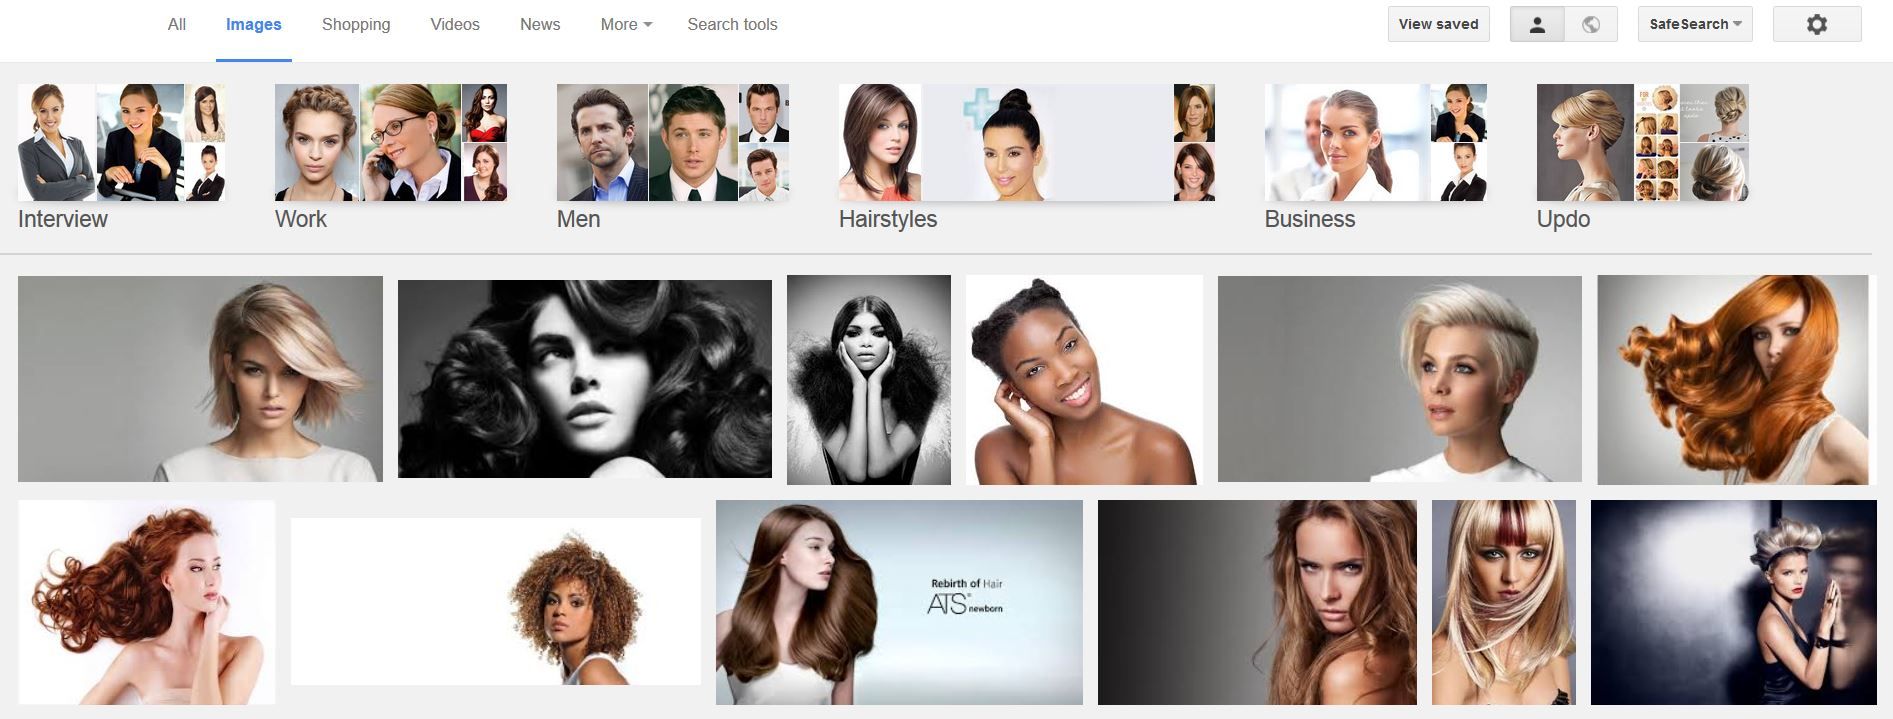 Google Image Search Results for 'professional hair'.